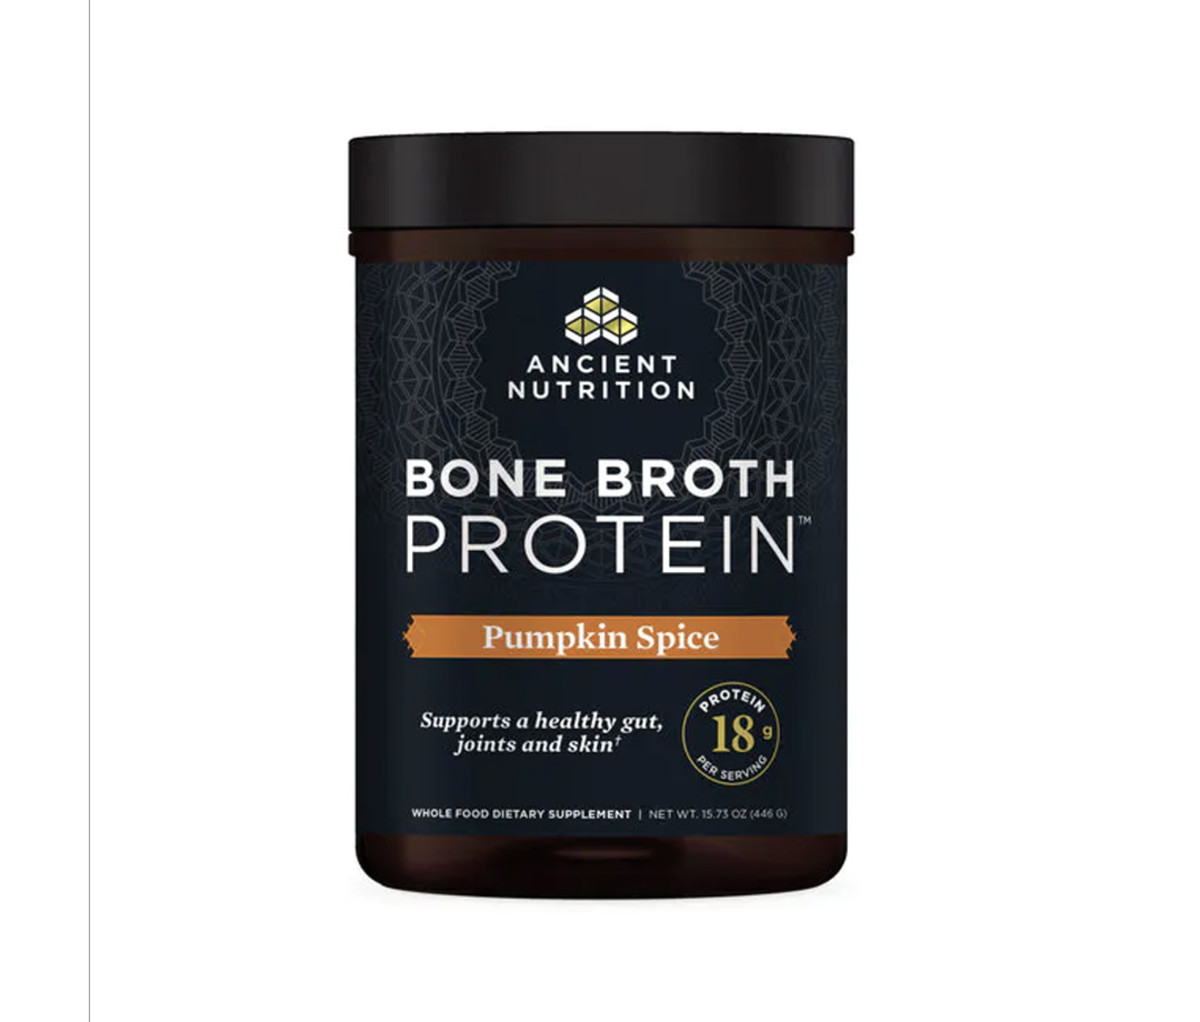 Grab This Pumpkin Spice Bone Broth and Save 20% at Ancient Nutrition